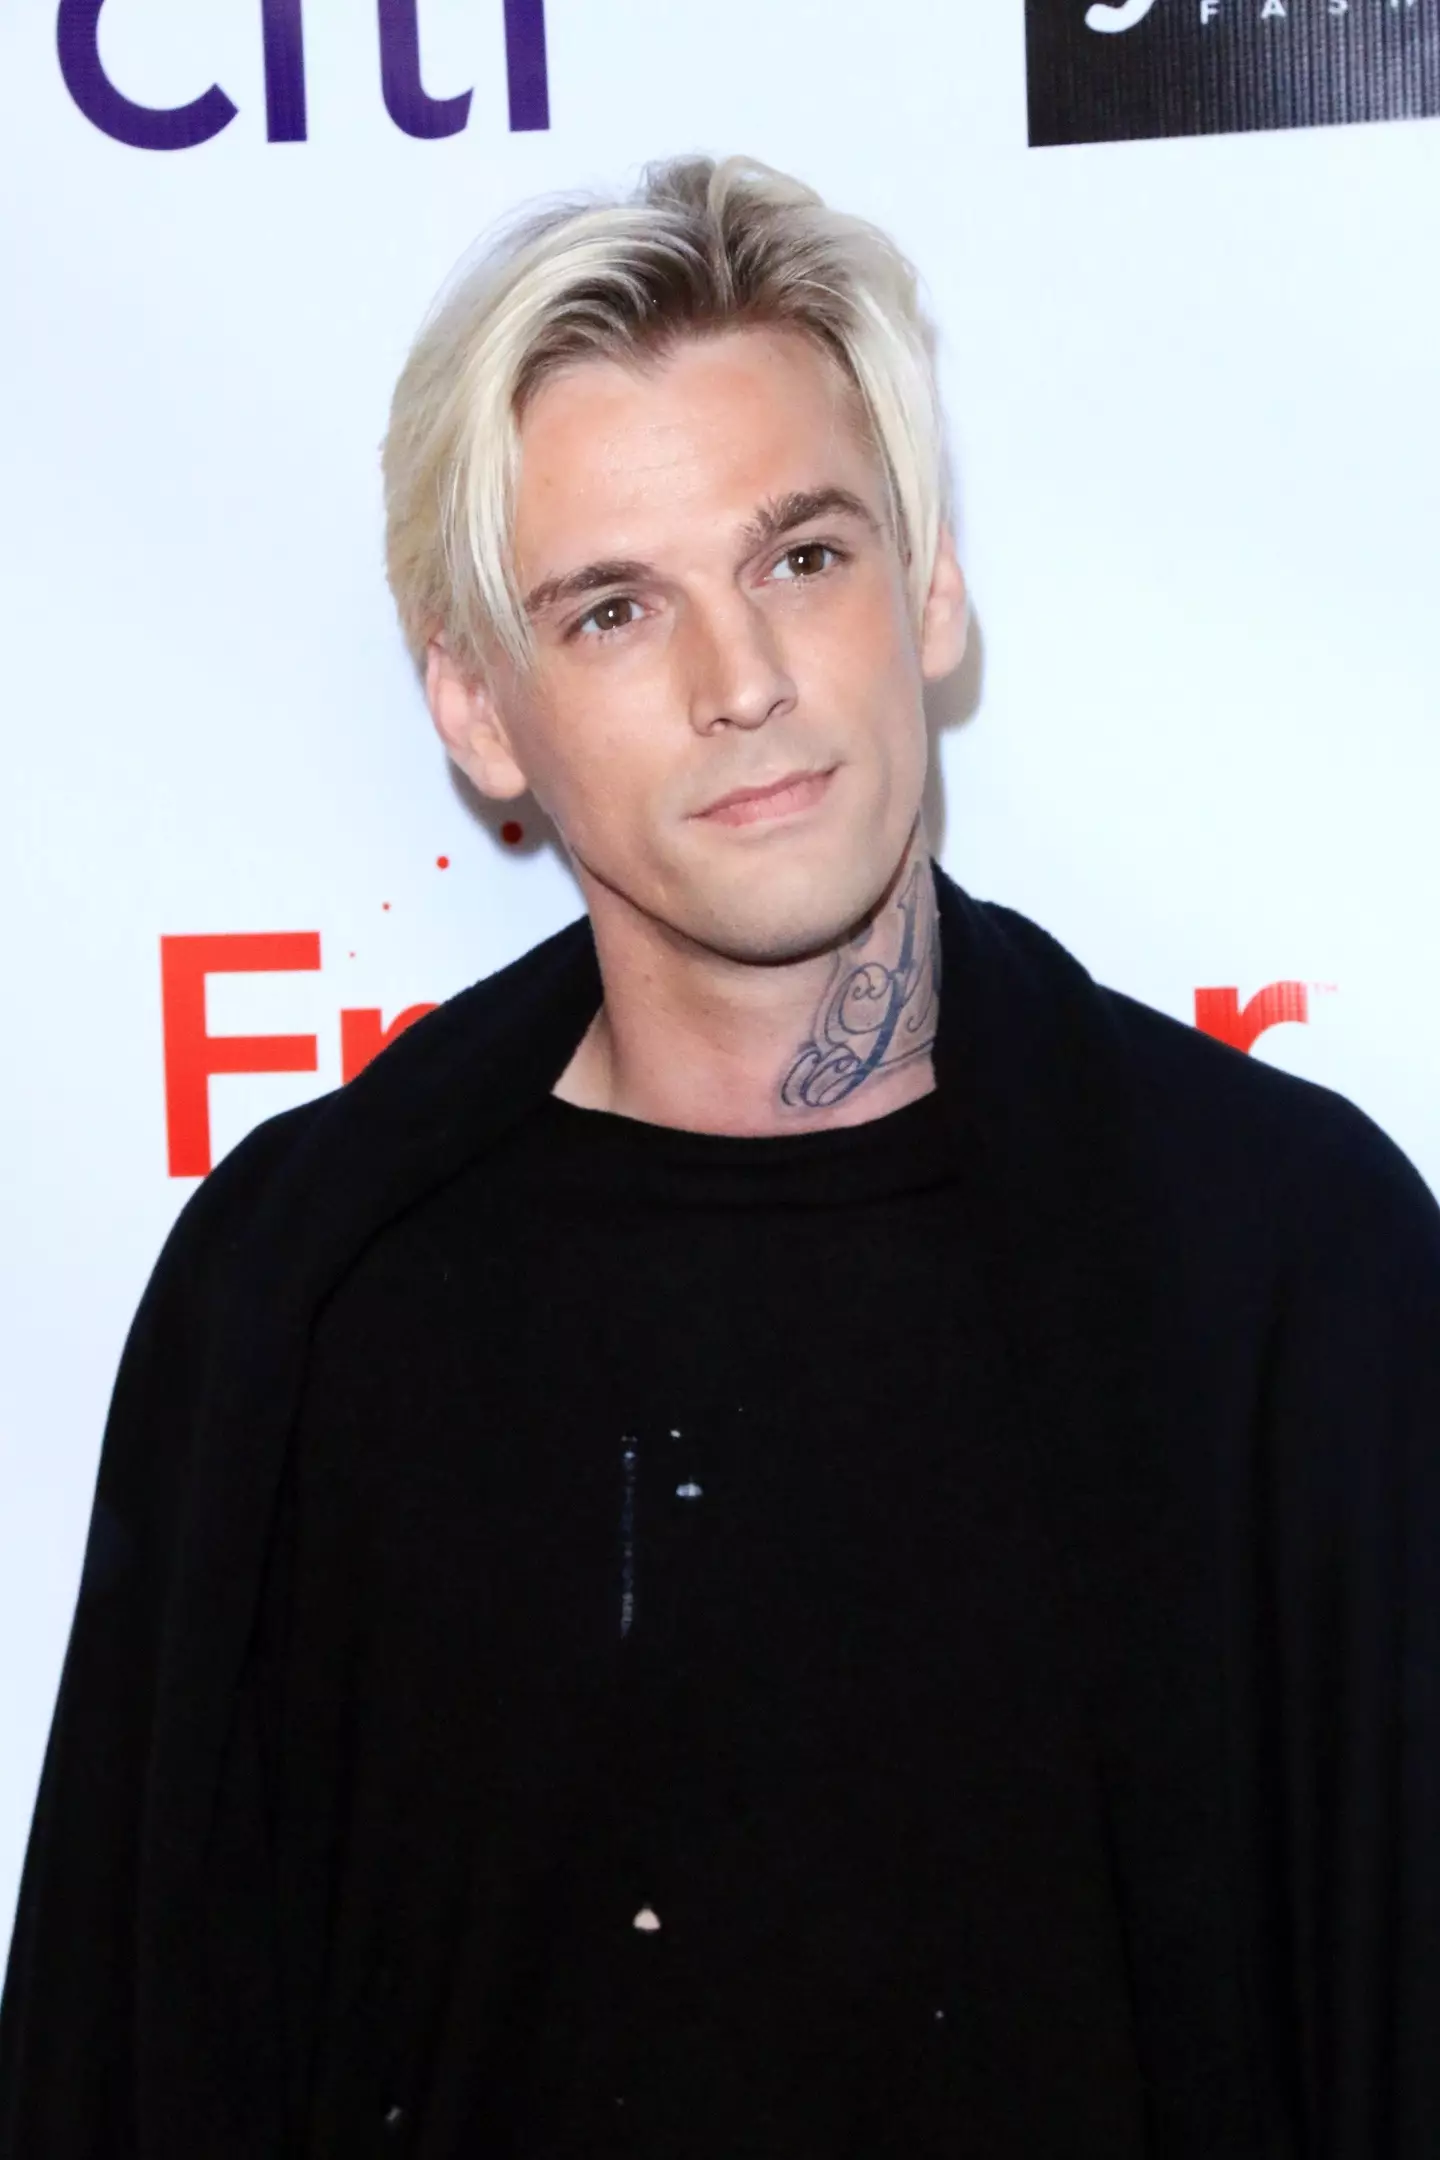 Aaron Carter’s manager has said that ‘cyberbullying’ broke him in a tragic statement.